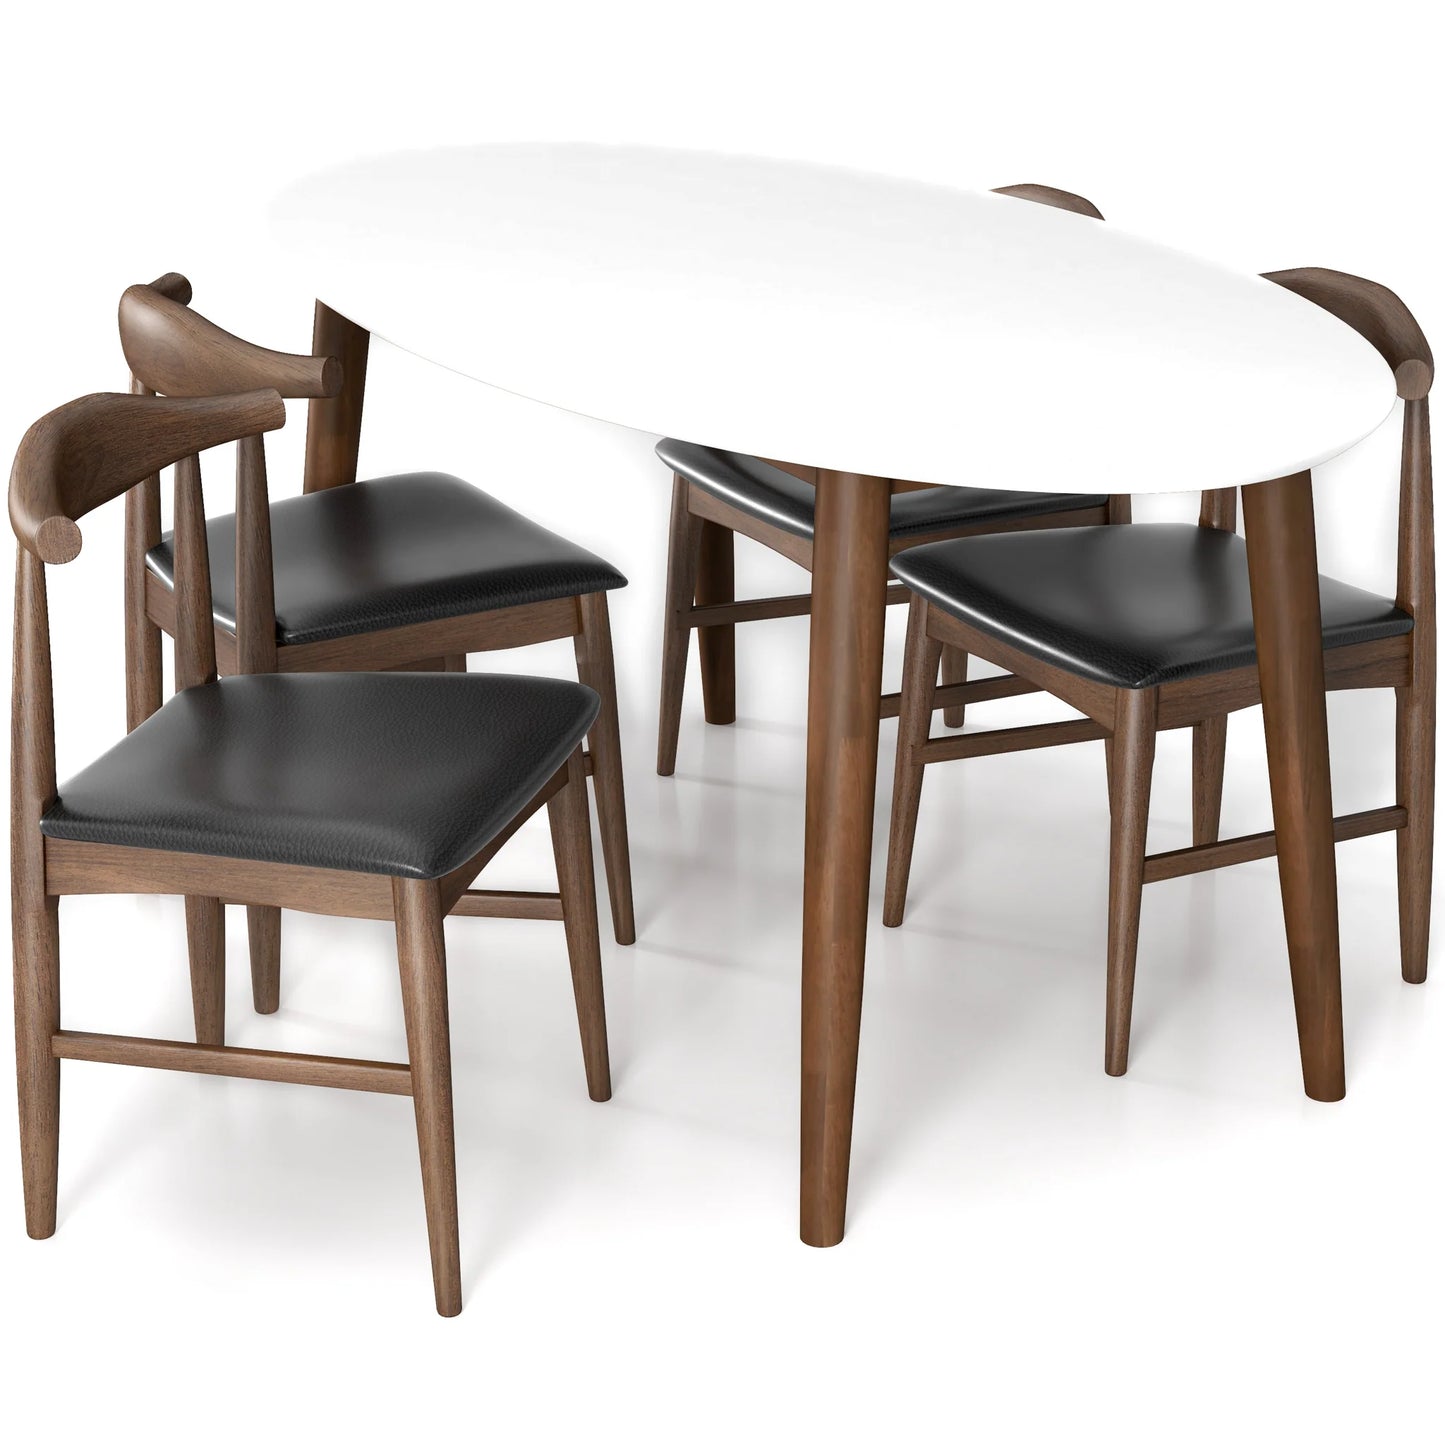 Rixos (White) Oval Dining Set with 4 Winston (Black Leather) Dining Chairs